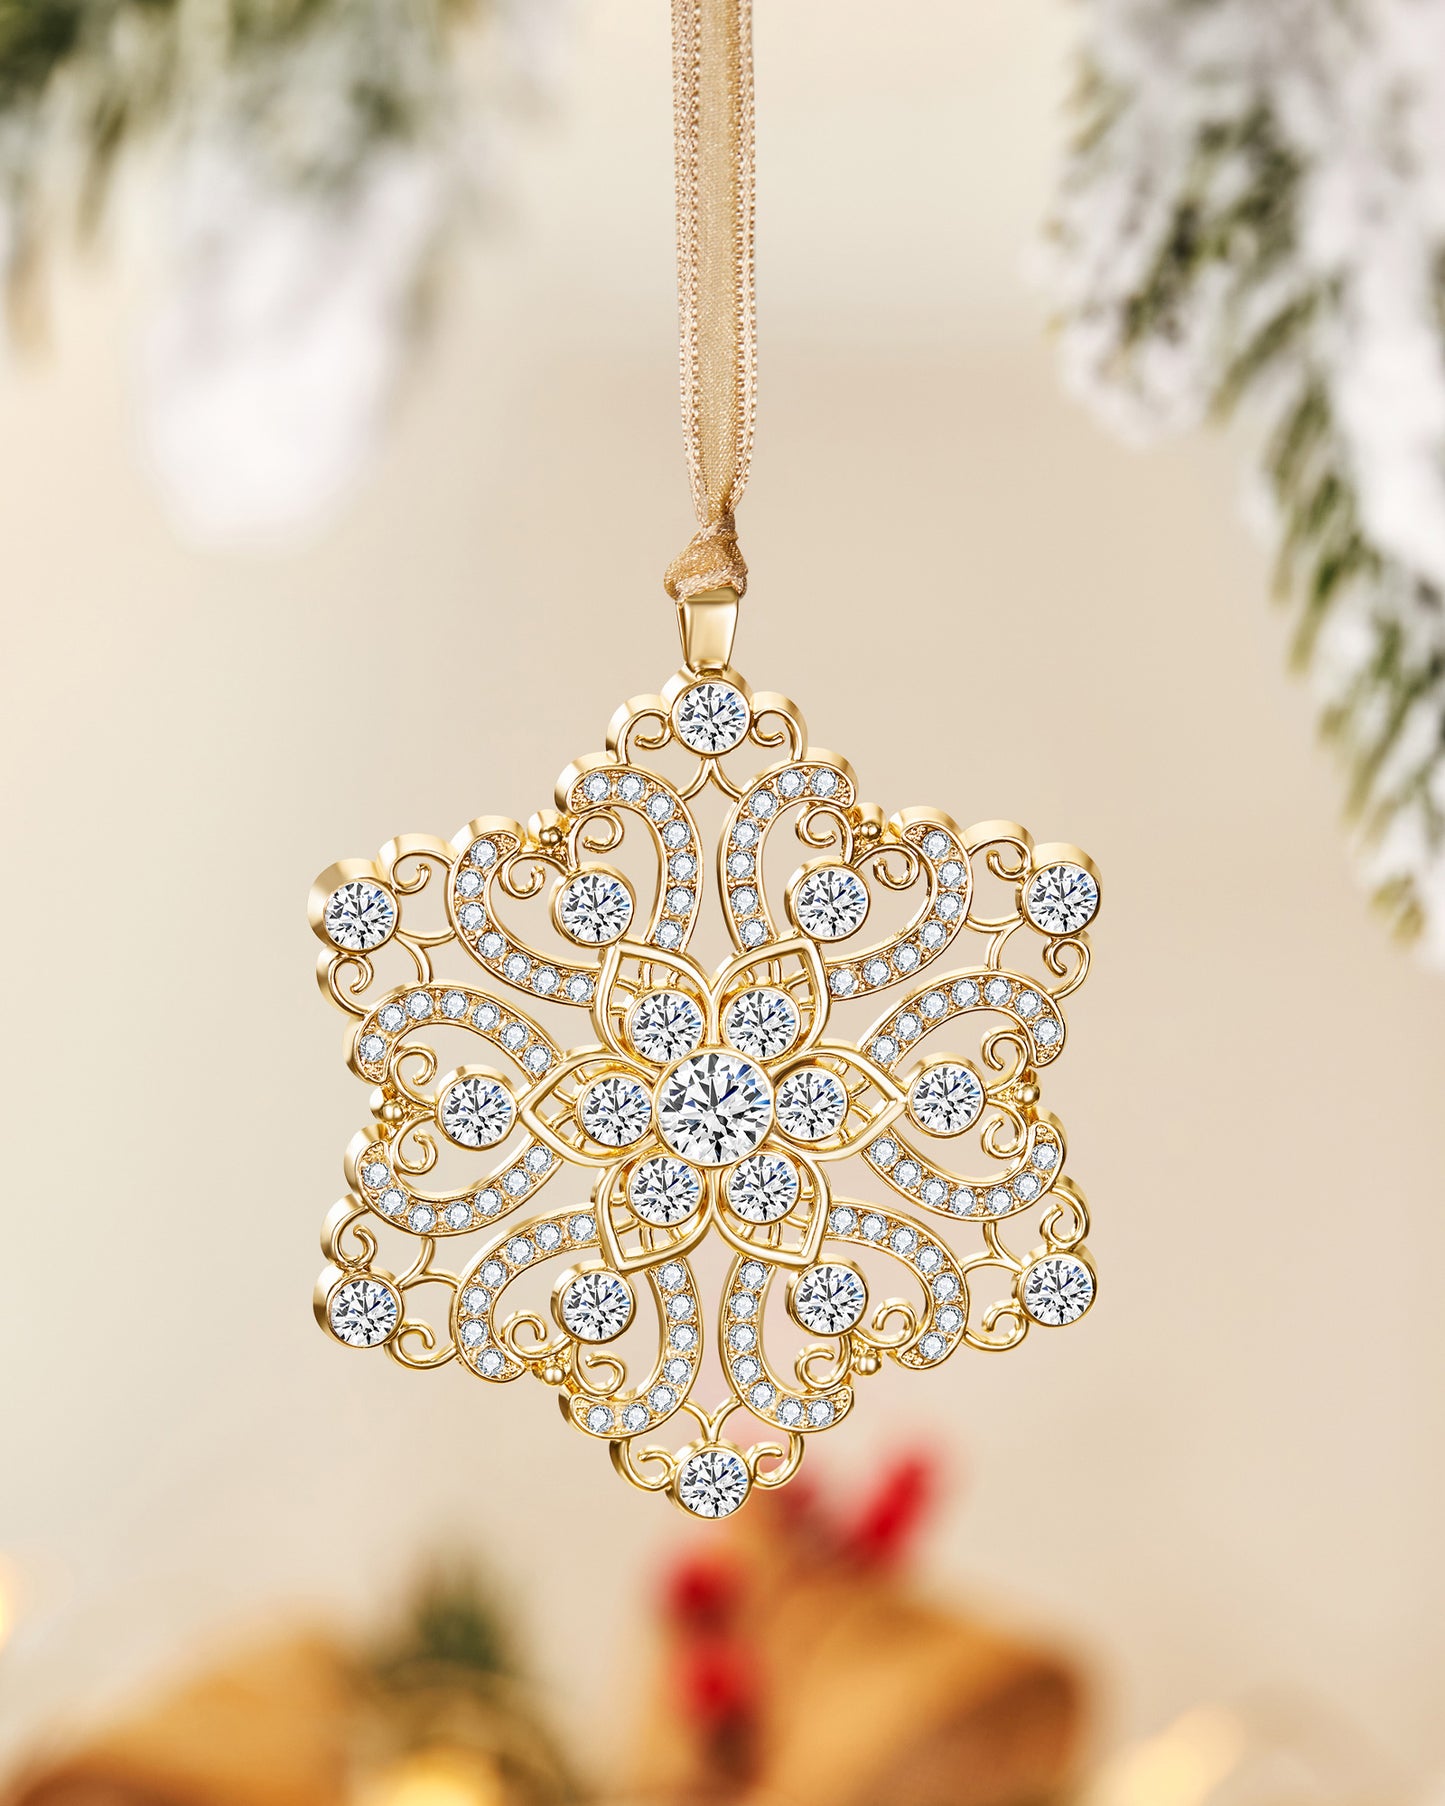 3 Piece Luxury Ornaments Set in Gold